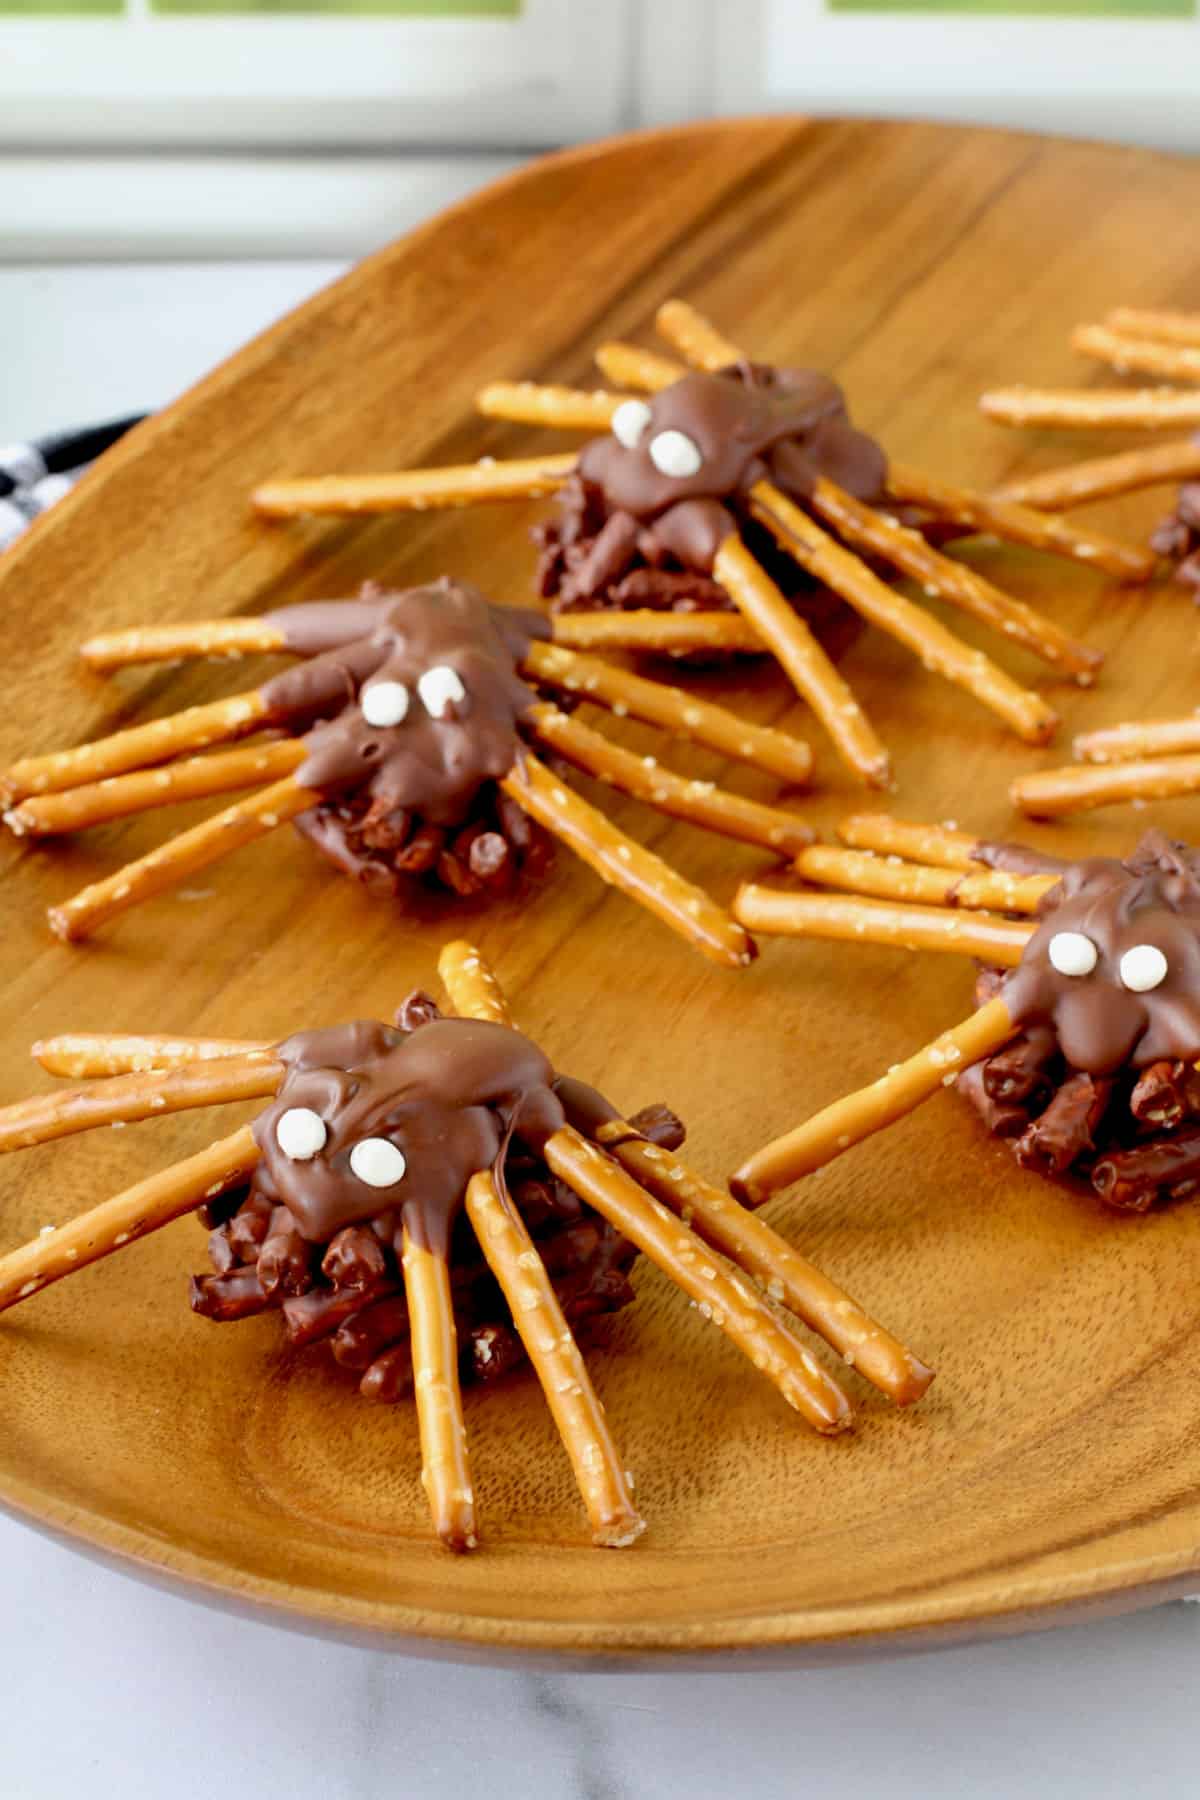 Chocolate Peanut Butter Spider Bites on a wood tray.